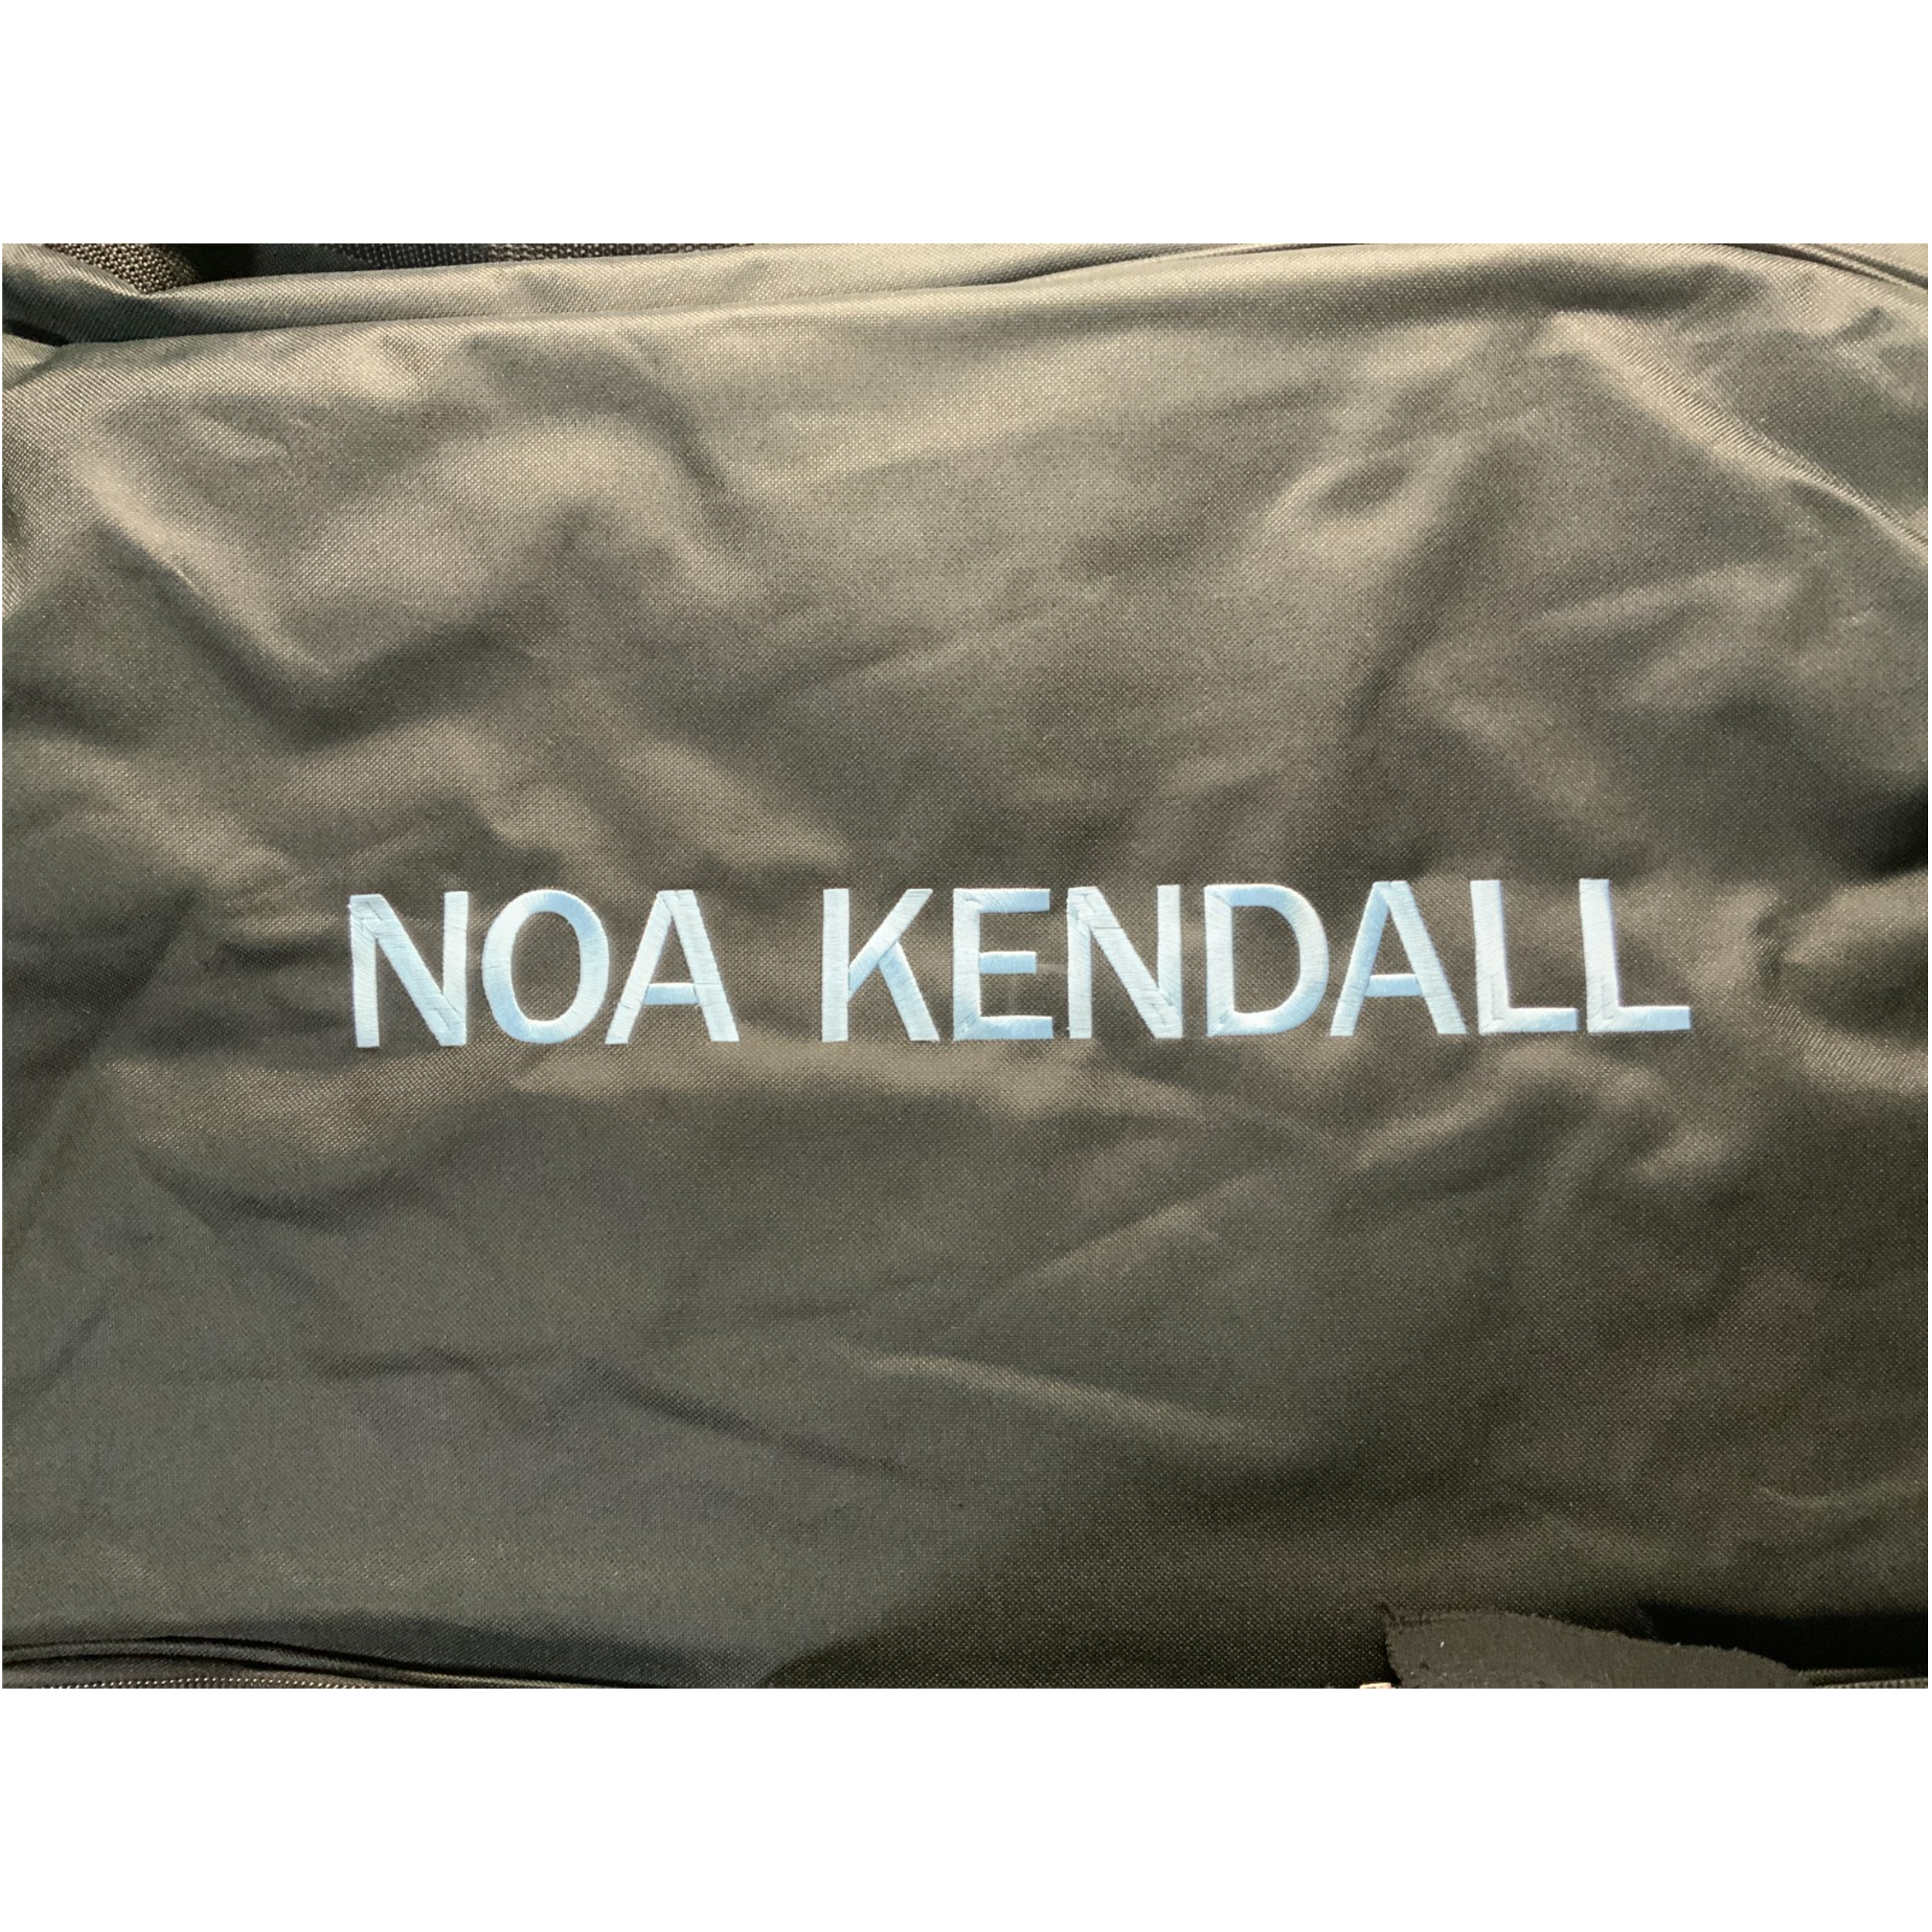 Extra Large Rolling Soft Trunk Duffel Bag 36 - Personalization Available